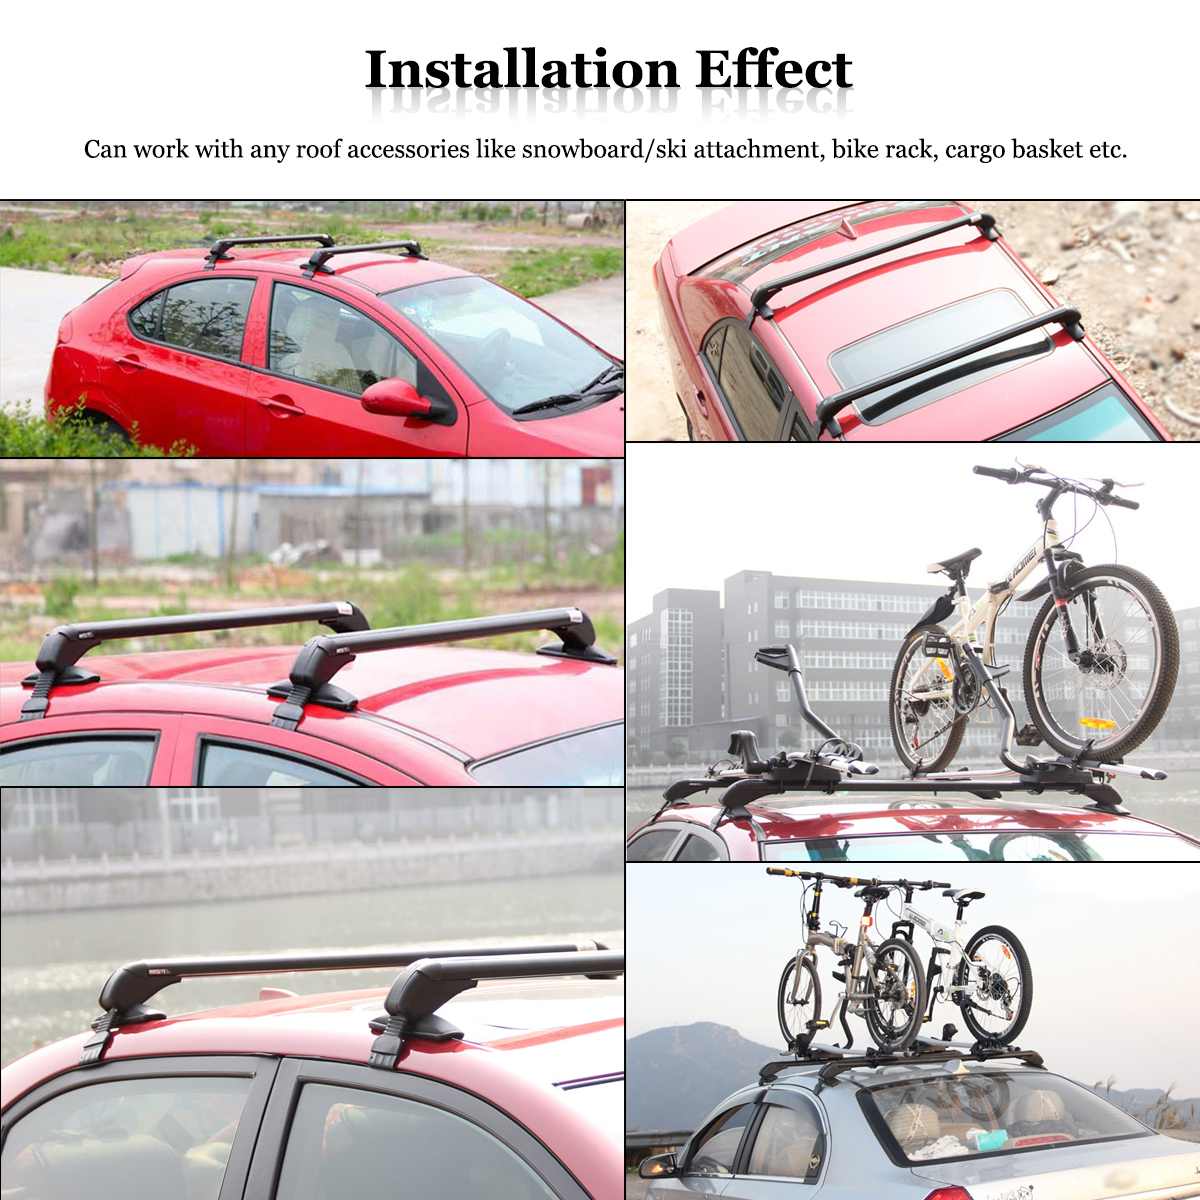 2pcs 100cm Car Roof Rack Cross Bars Anti-theft Lockable Roof Racks Luggage Carrier with Rubber Gasket For 4DR Car Sedans SUVs